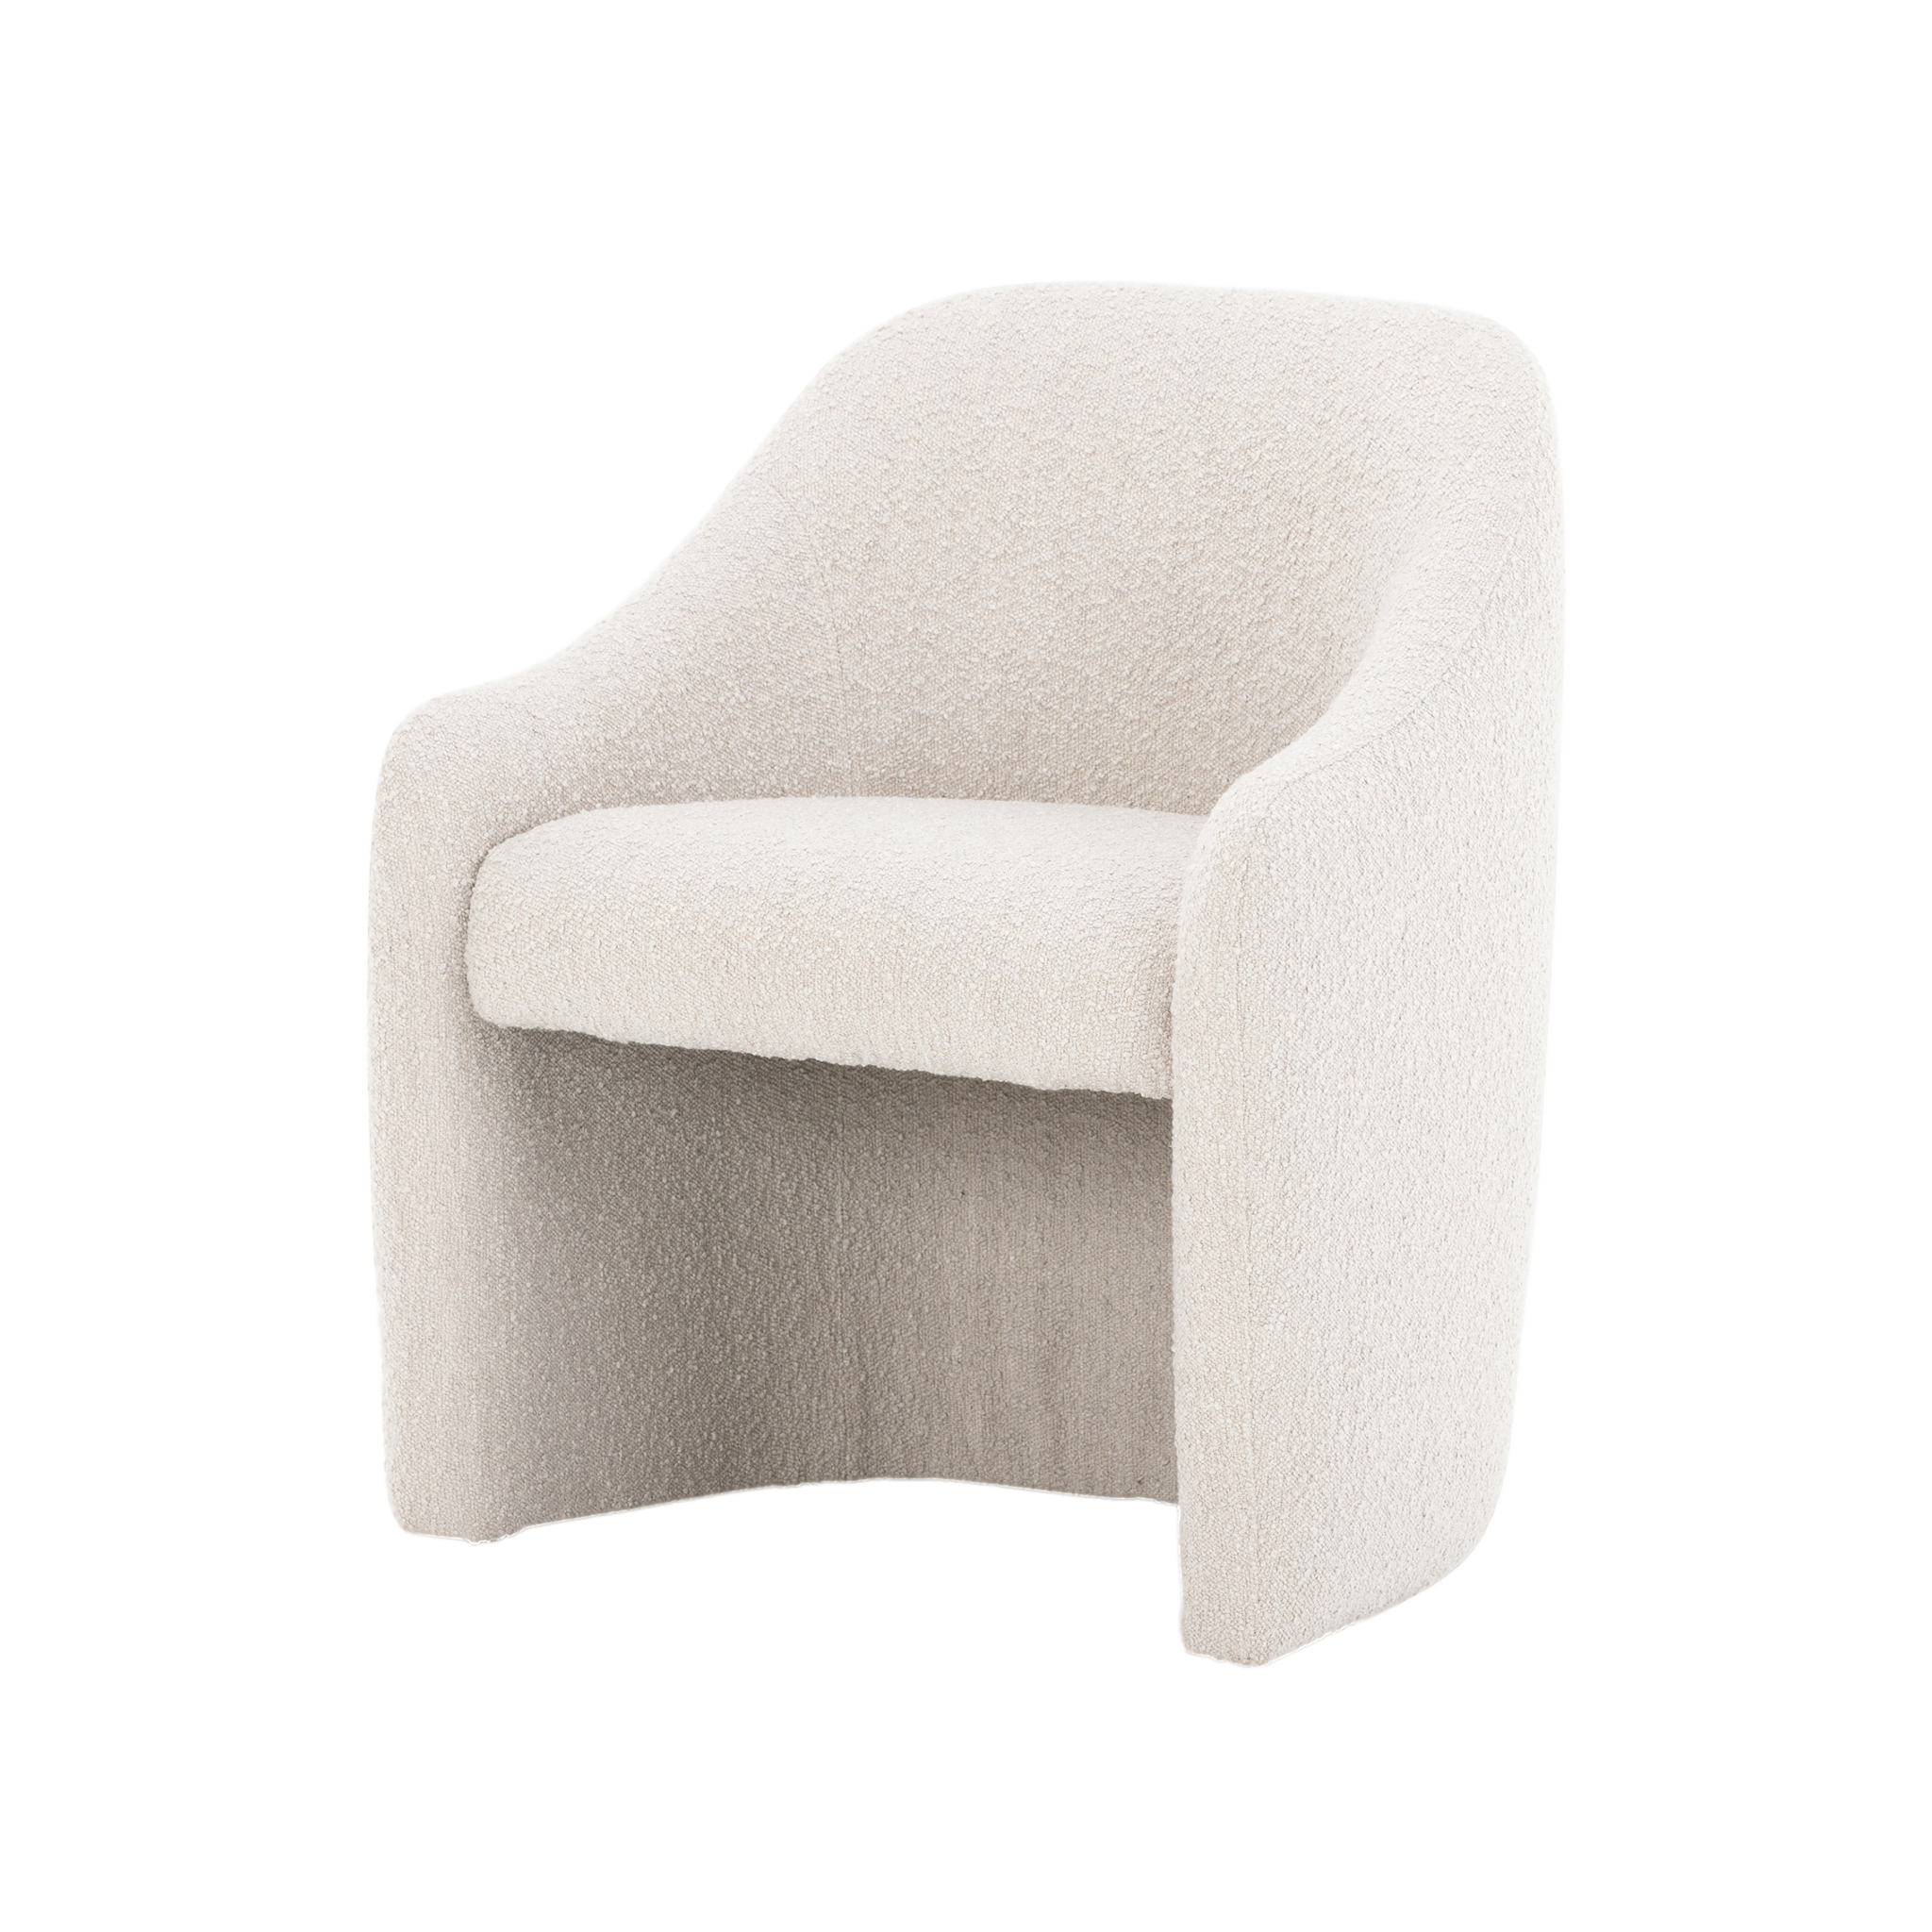 Levi Dining Chair in Knoll Sand